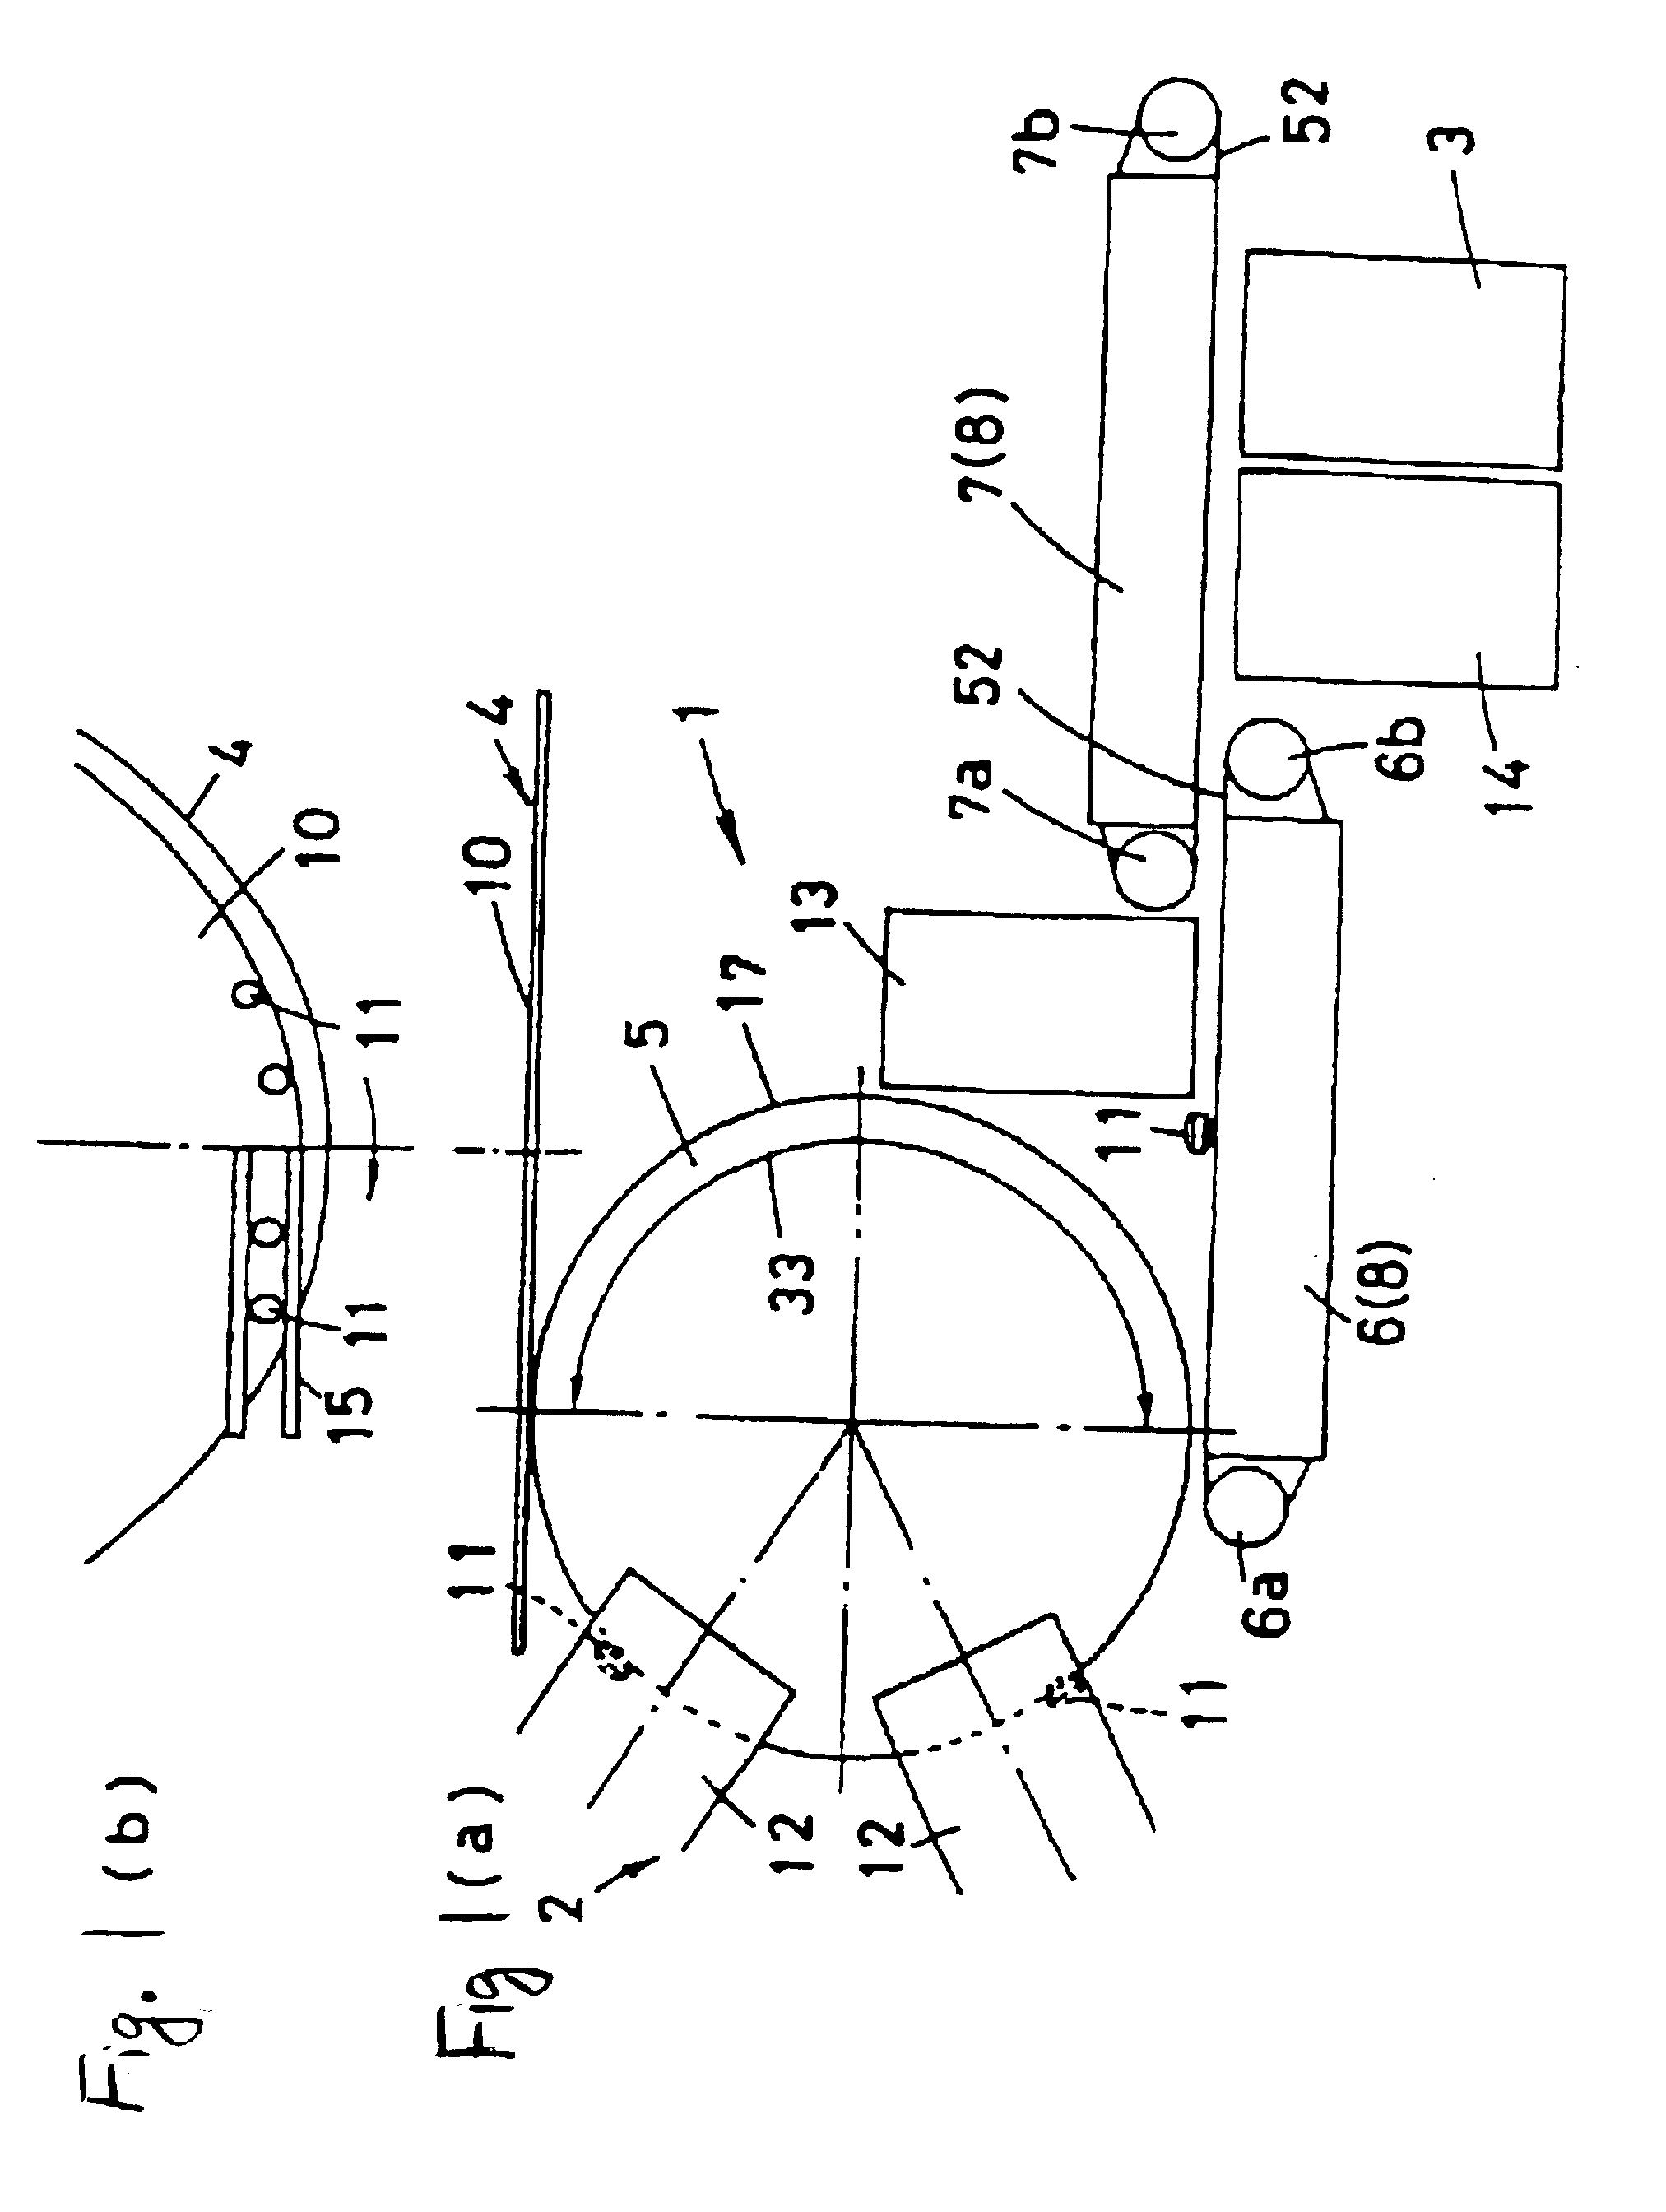 Conveying apparatus, inspecting apparatus and aligningly and supplying apparatus